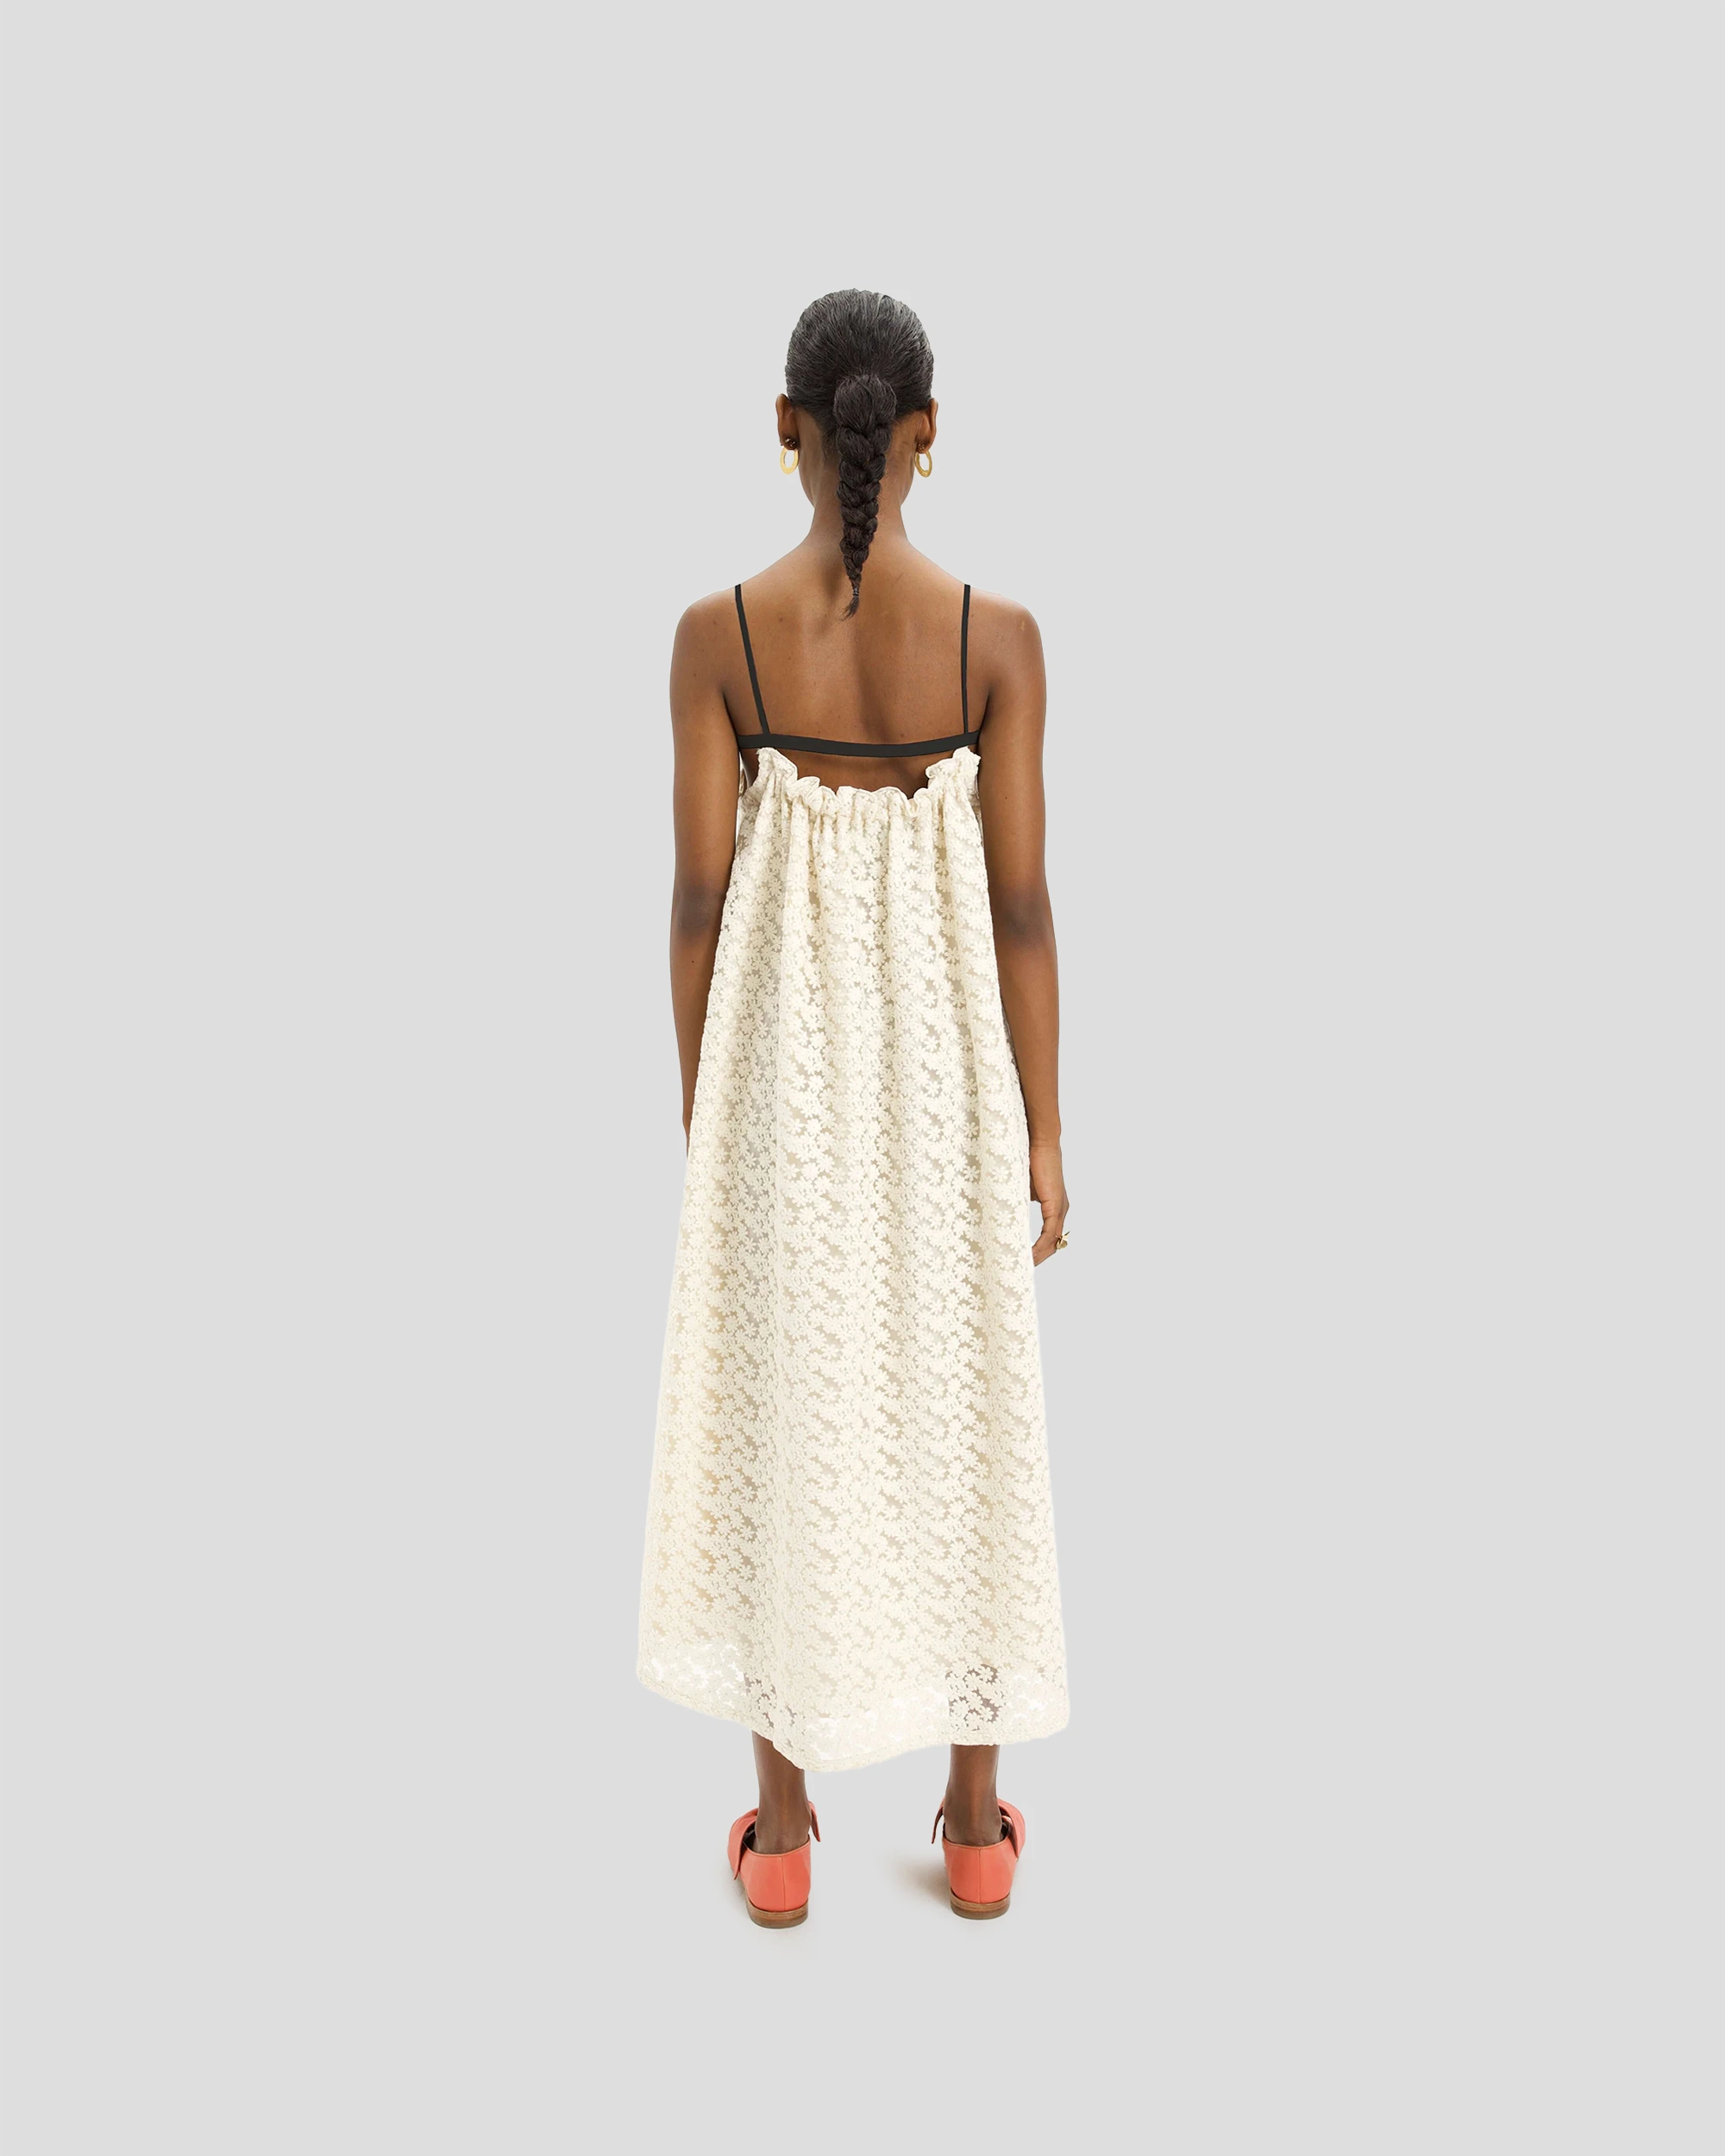 Vickie Dress in Albatre Lace